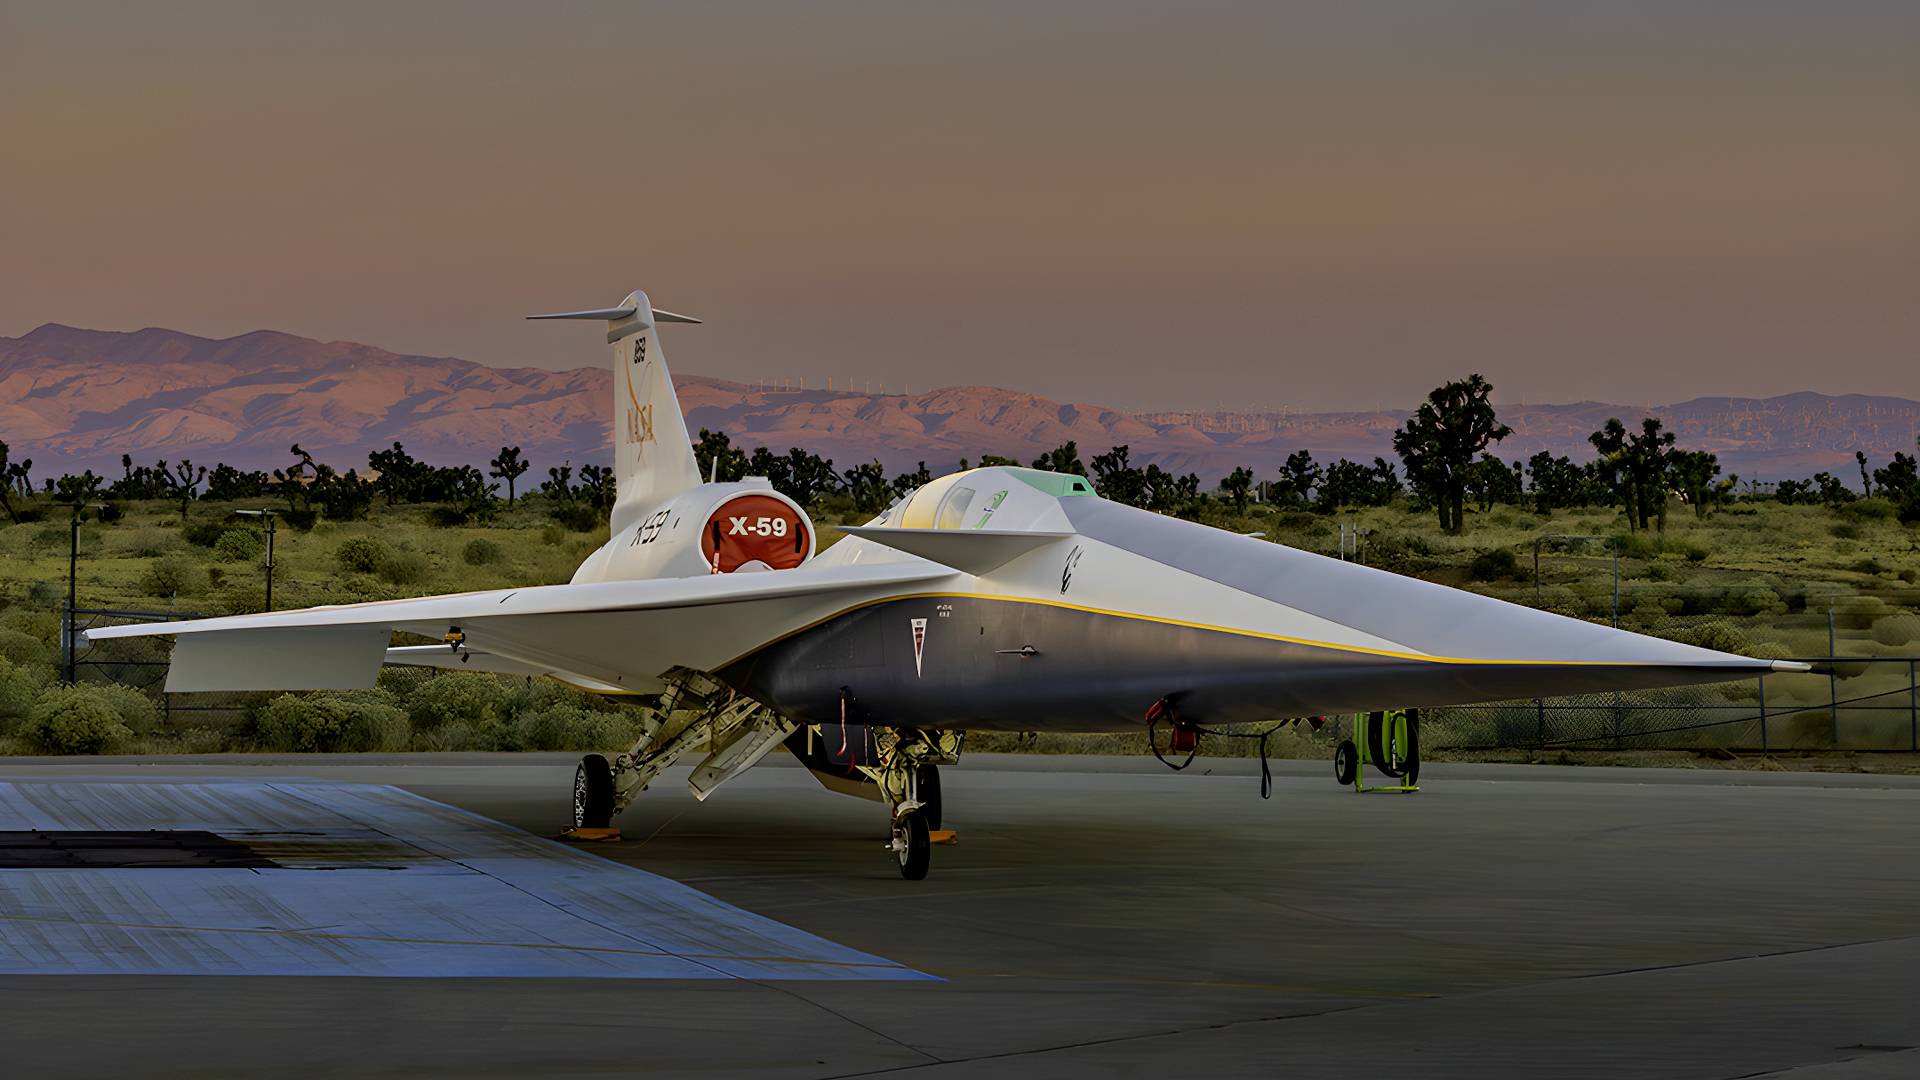 Lockheed And NASA Unveil Finished X-59 Low Boom Aircraft